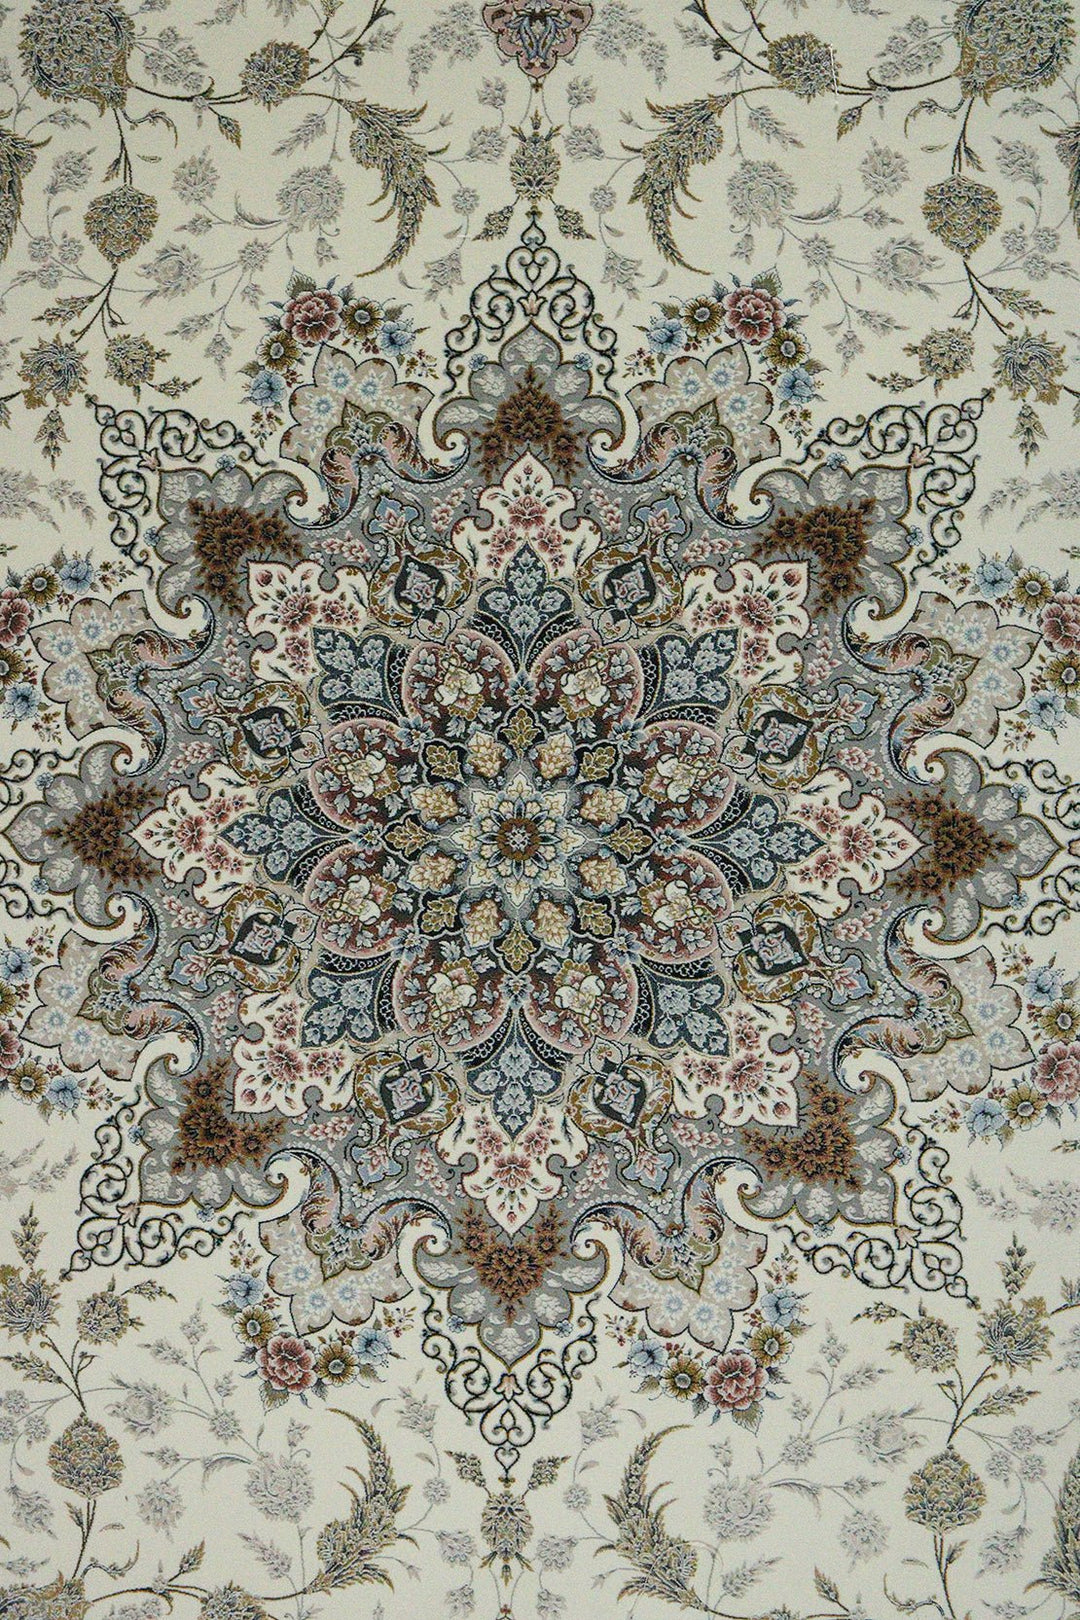 Iranian Premium Quality Authentic 1500 Rug - 8.2 x 11.4 FT - Cream - Resilient Construction for Long-Lasting Use - V Surfaces